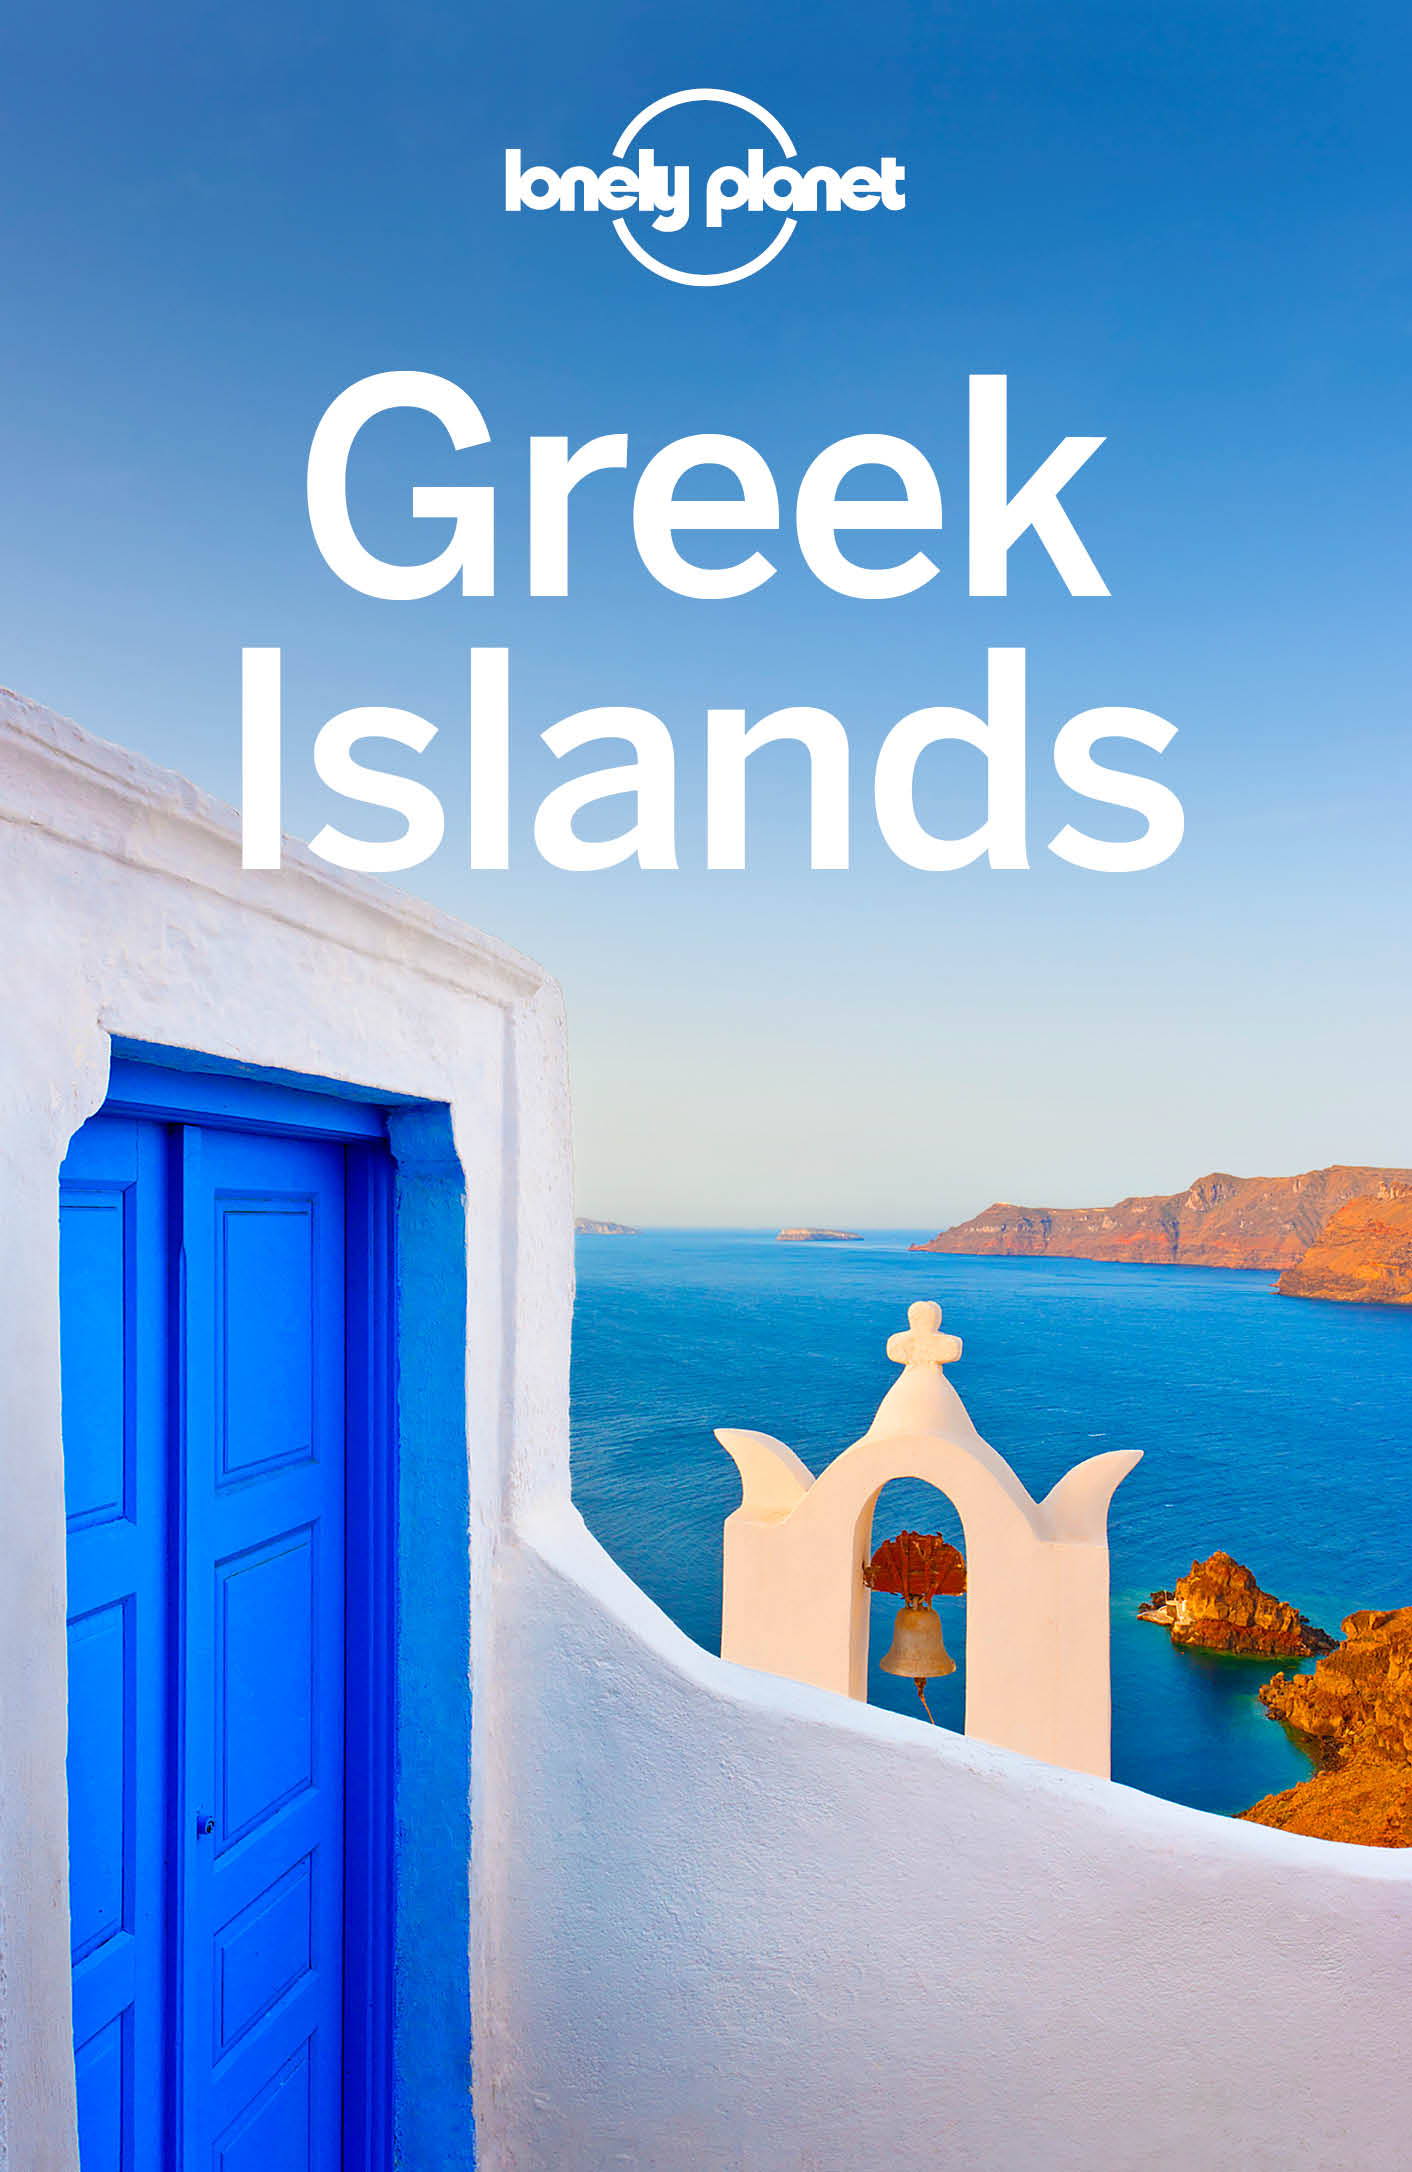 Lonely Planet Greek Islands - image 1